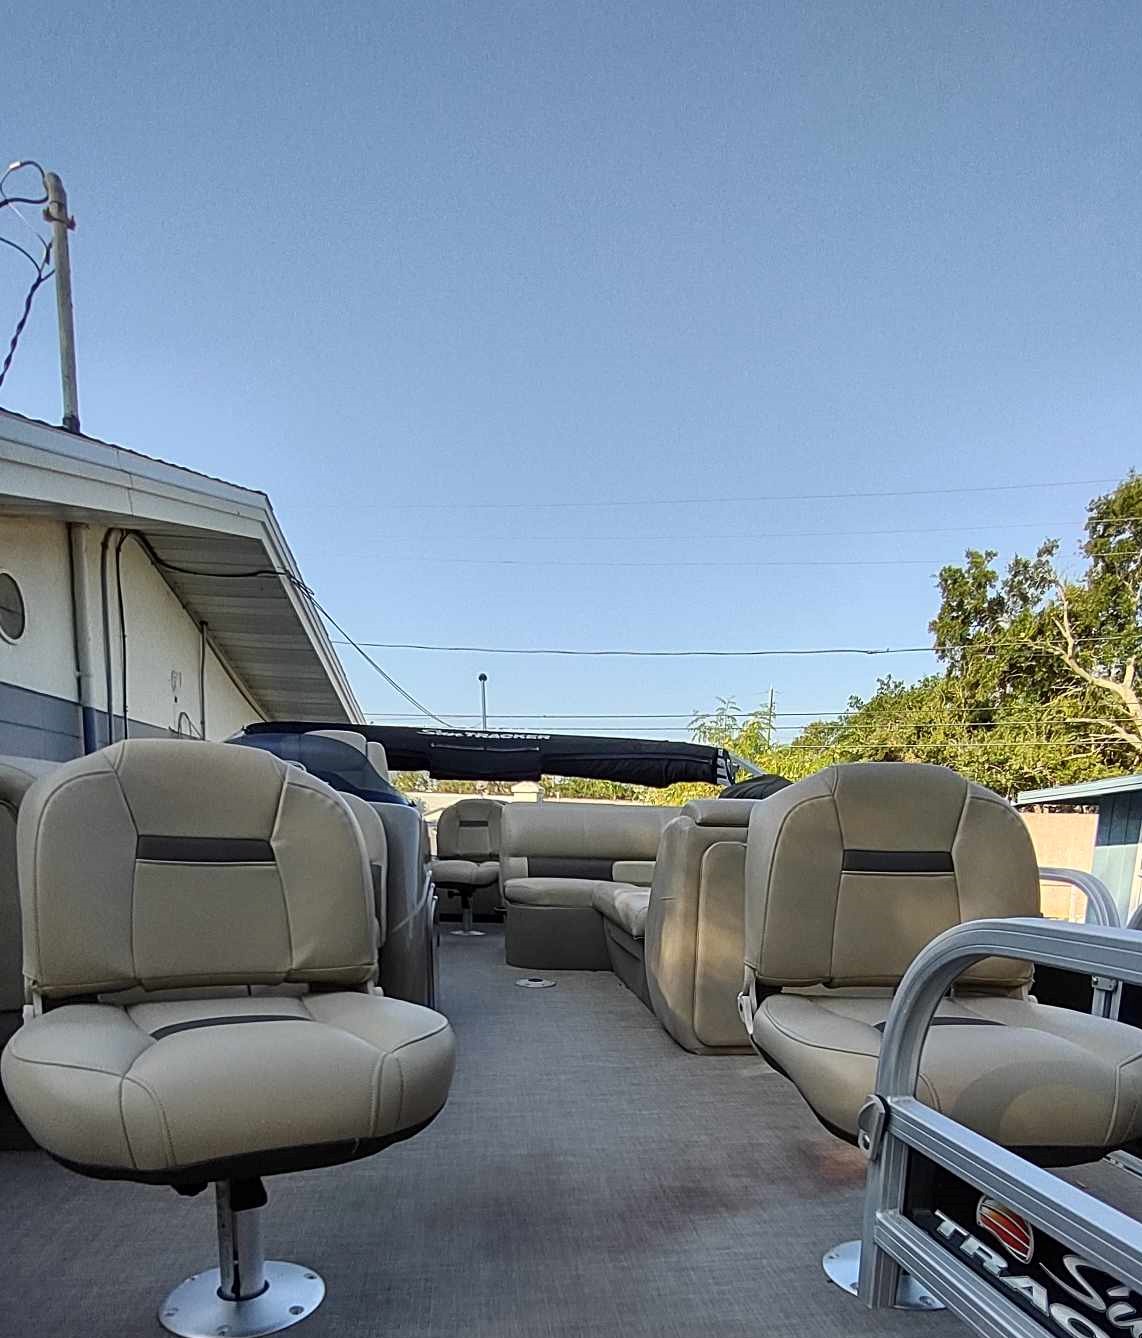 2020 Sun Tracker Fishin' Barge 22 DLX Fishing boat for sale in St Petersburg, FL - image 3 